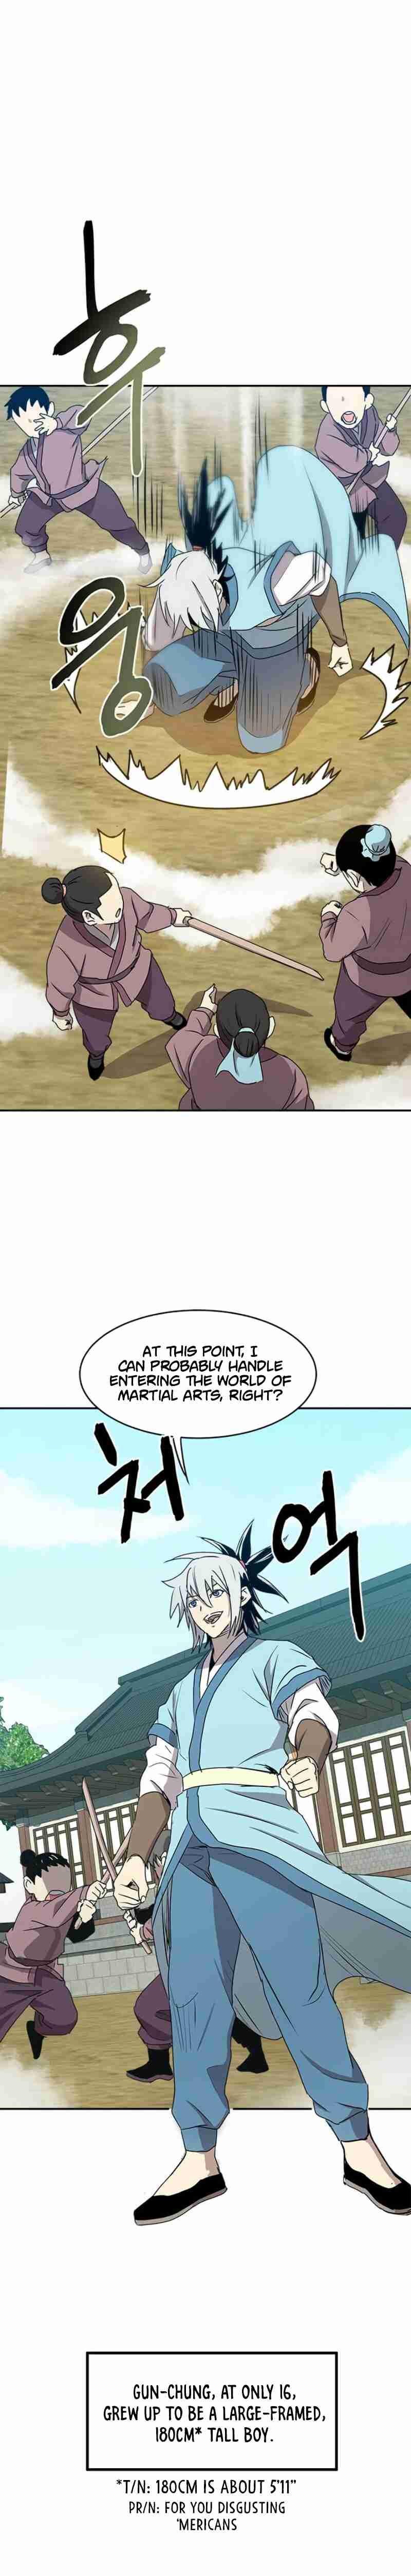 Strongest Fighter Vol. 1 Ch. 6